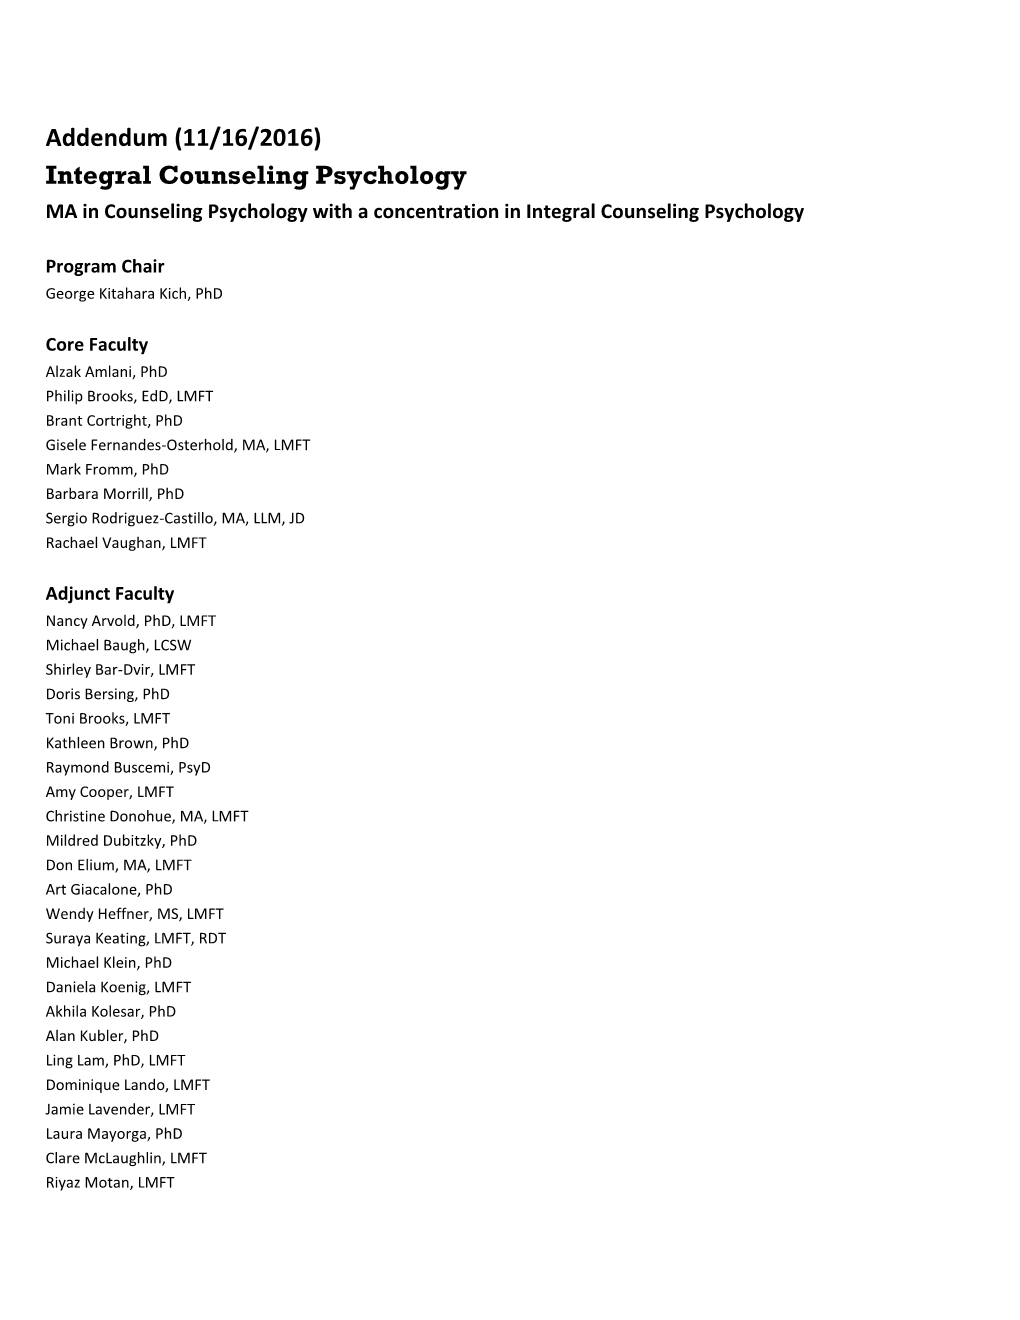 Integral Counseling Psychology MA in Counseling Psychology with a Concentration in Integral Counseling Psychology